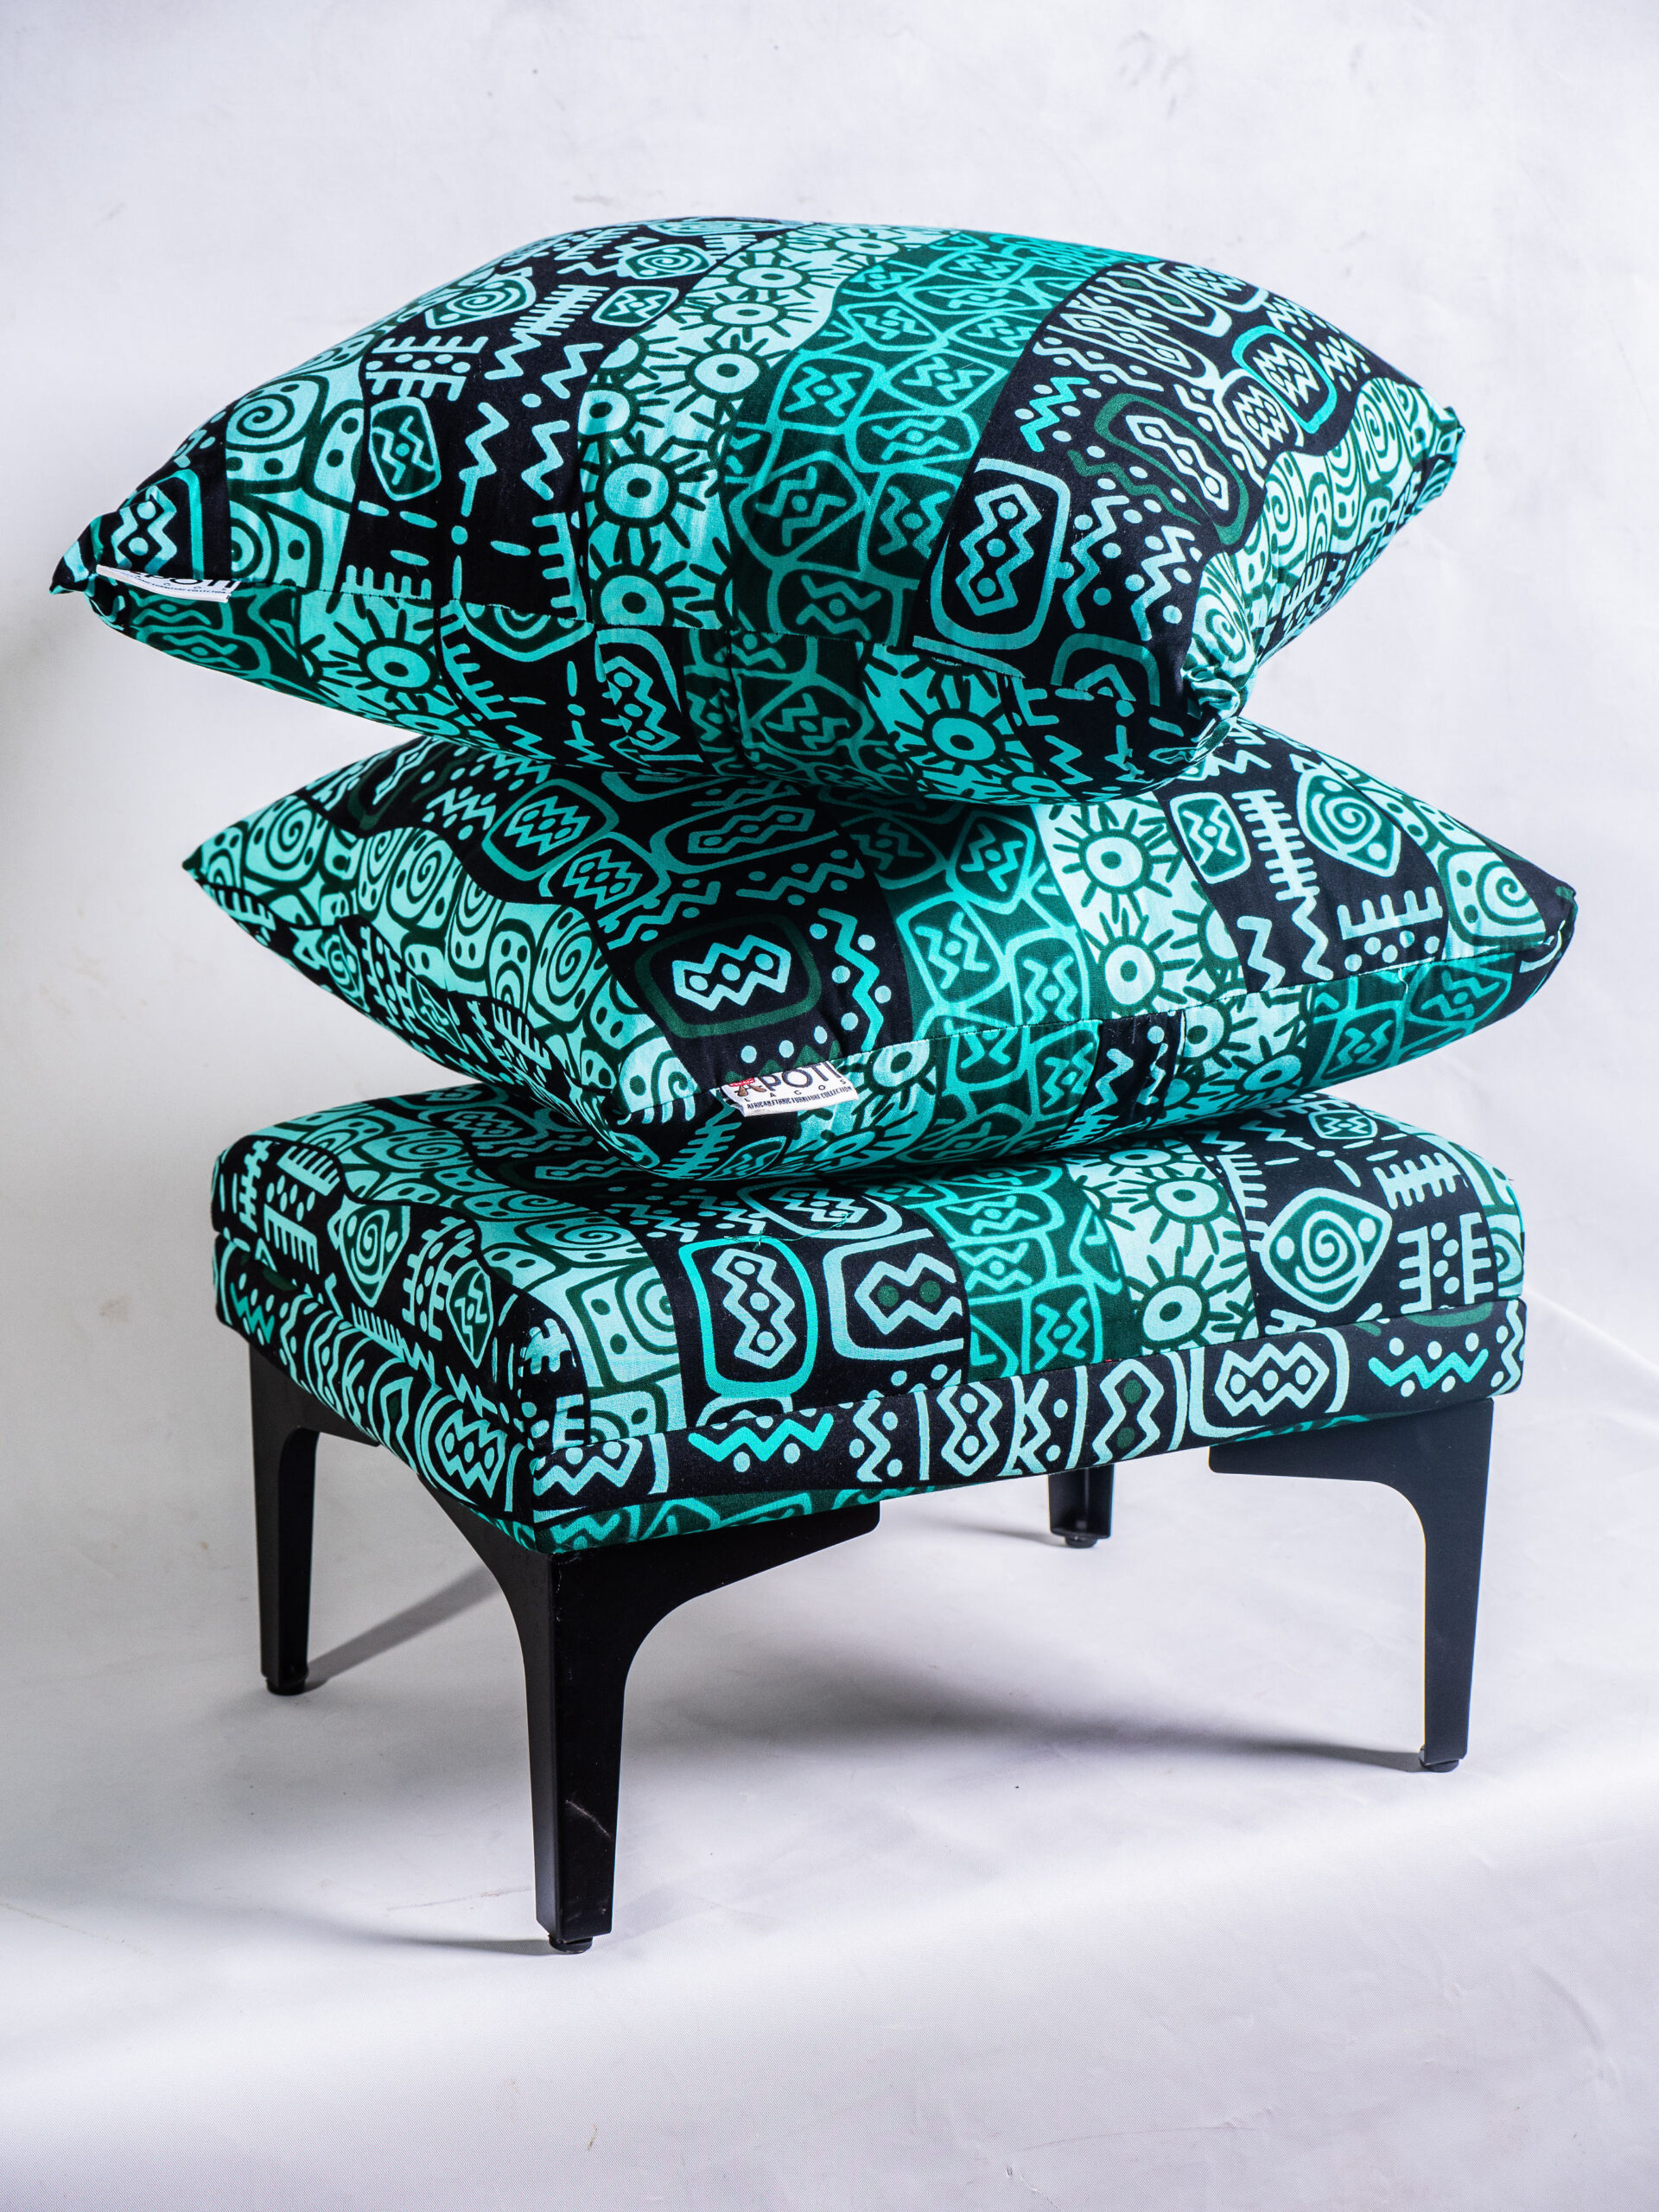 Adinkra Footstools with Twin Throw Pillows